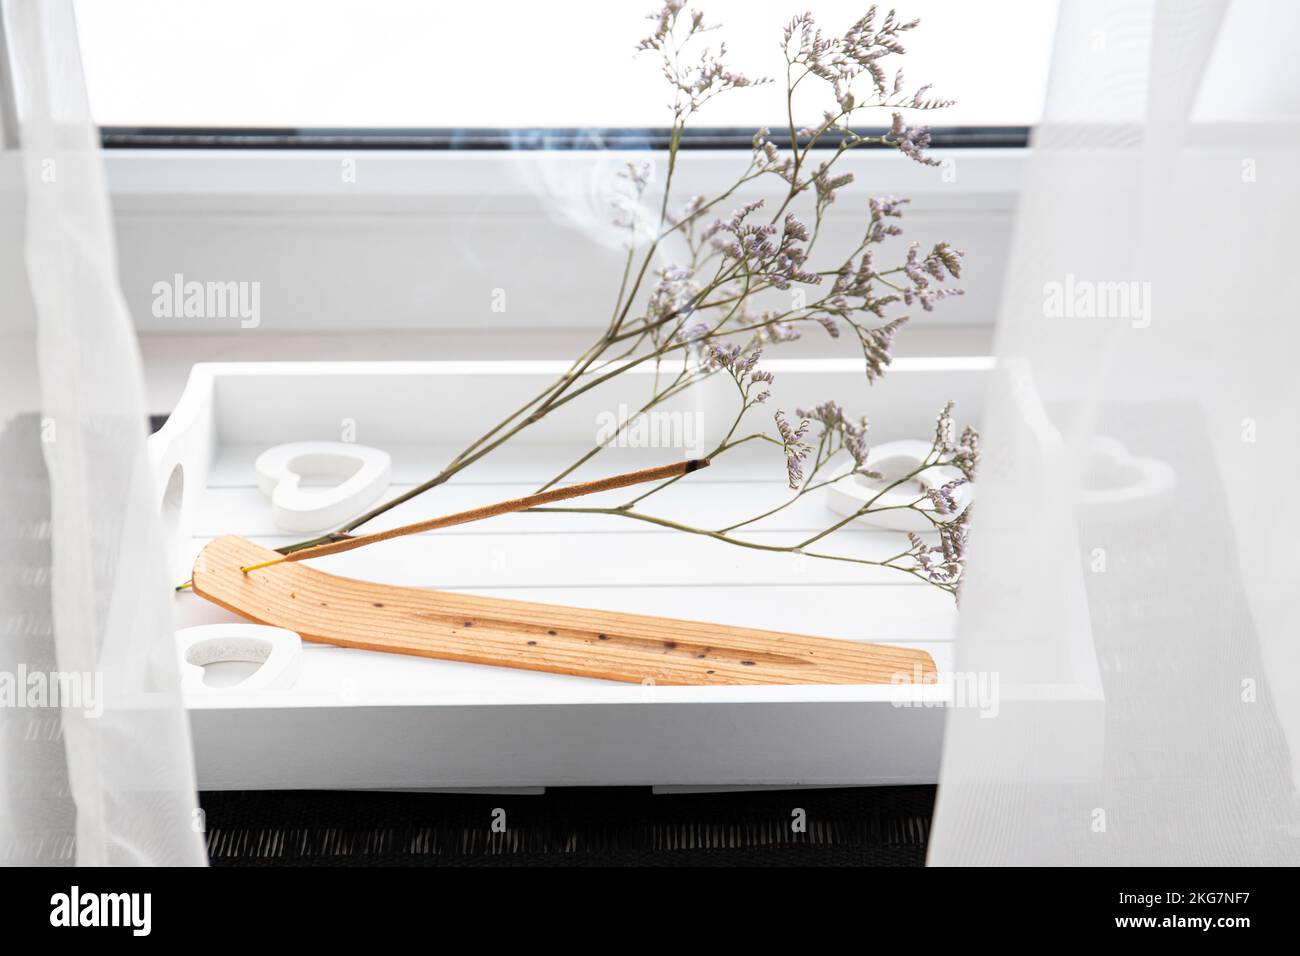 Scent Styling concept. Home window sill with incense candle burning on white minimal tray, create good mood with good pleasant scent. Stock Photo